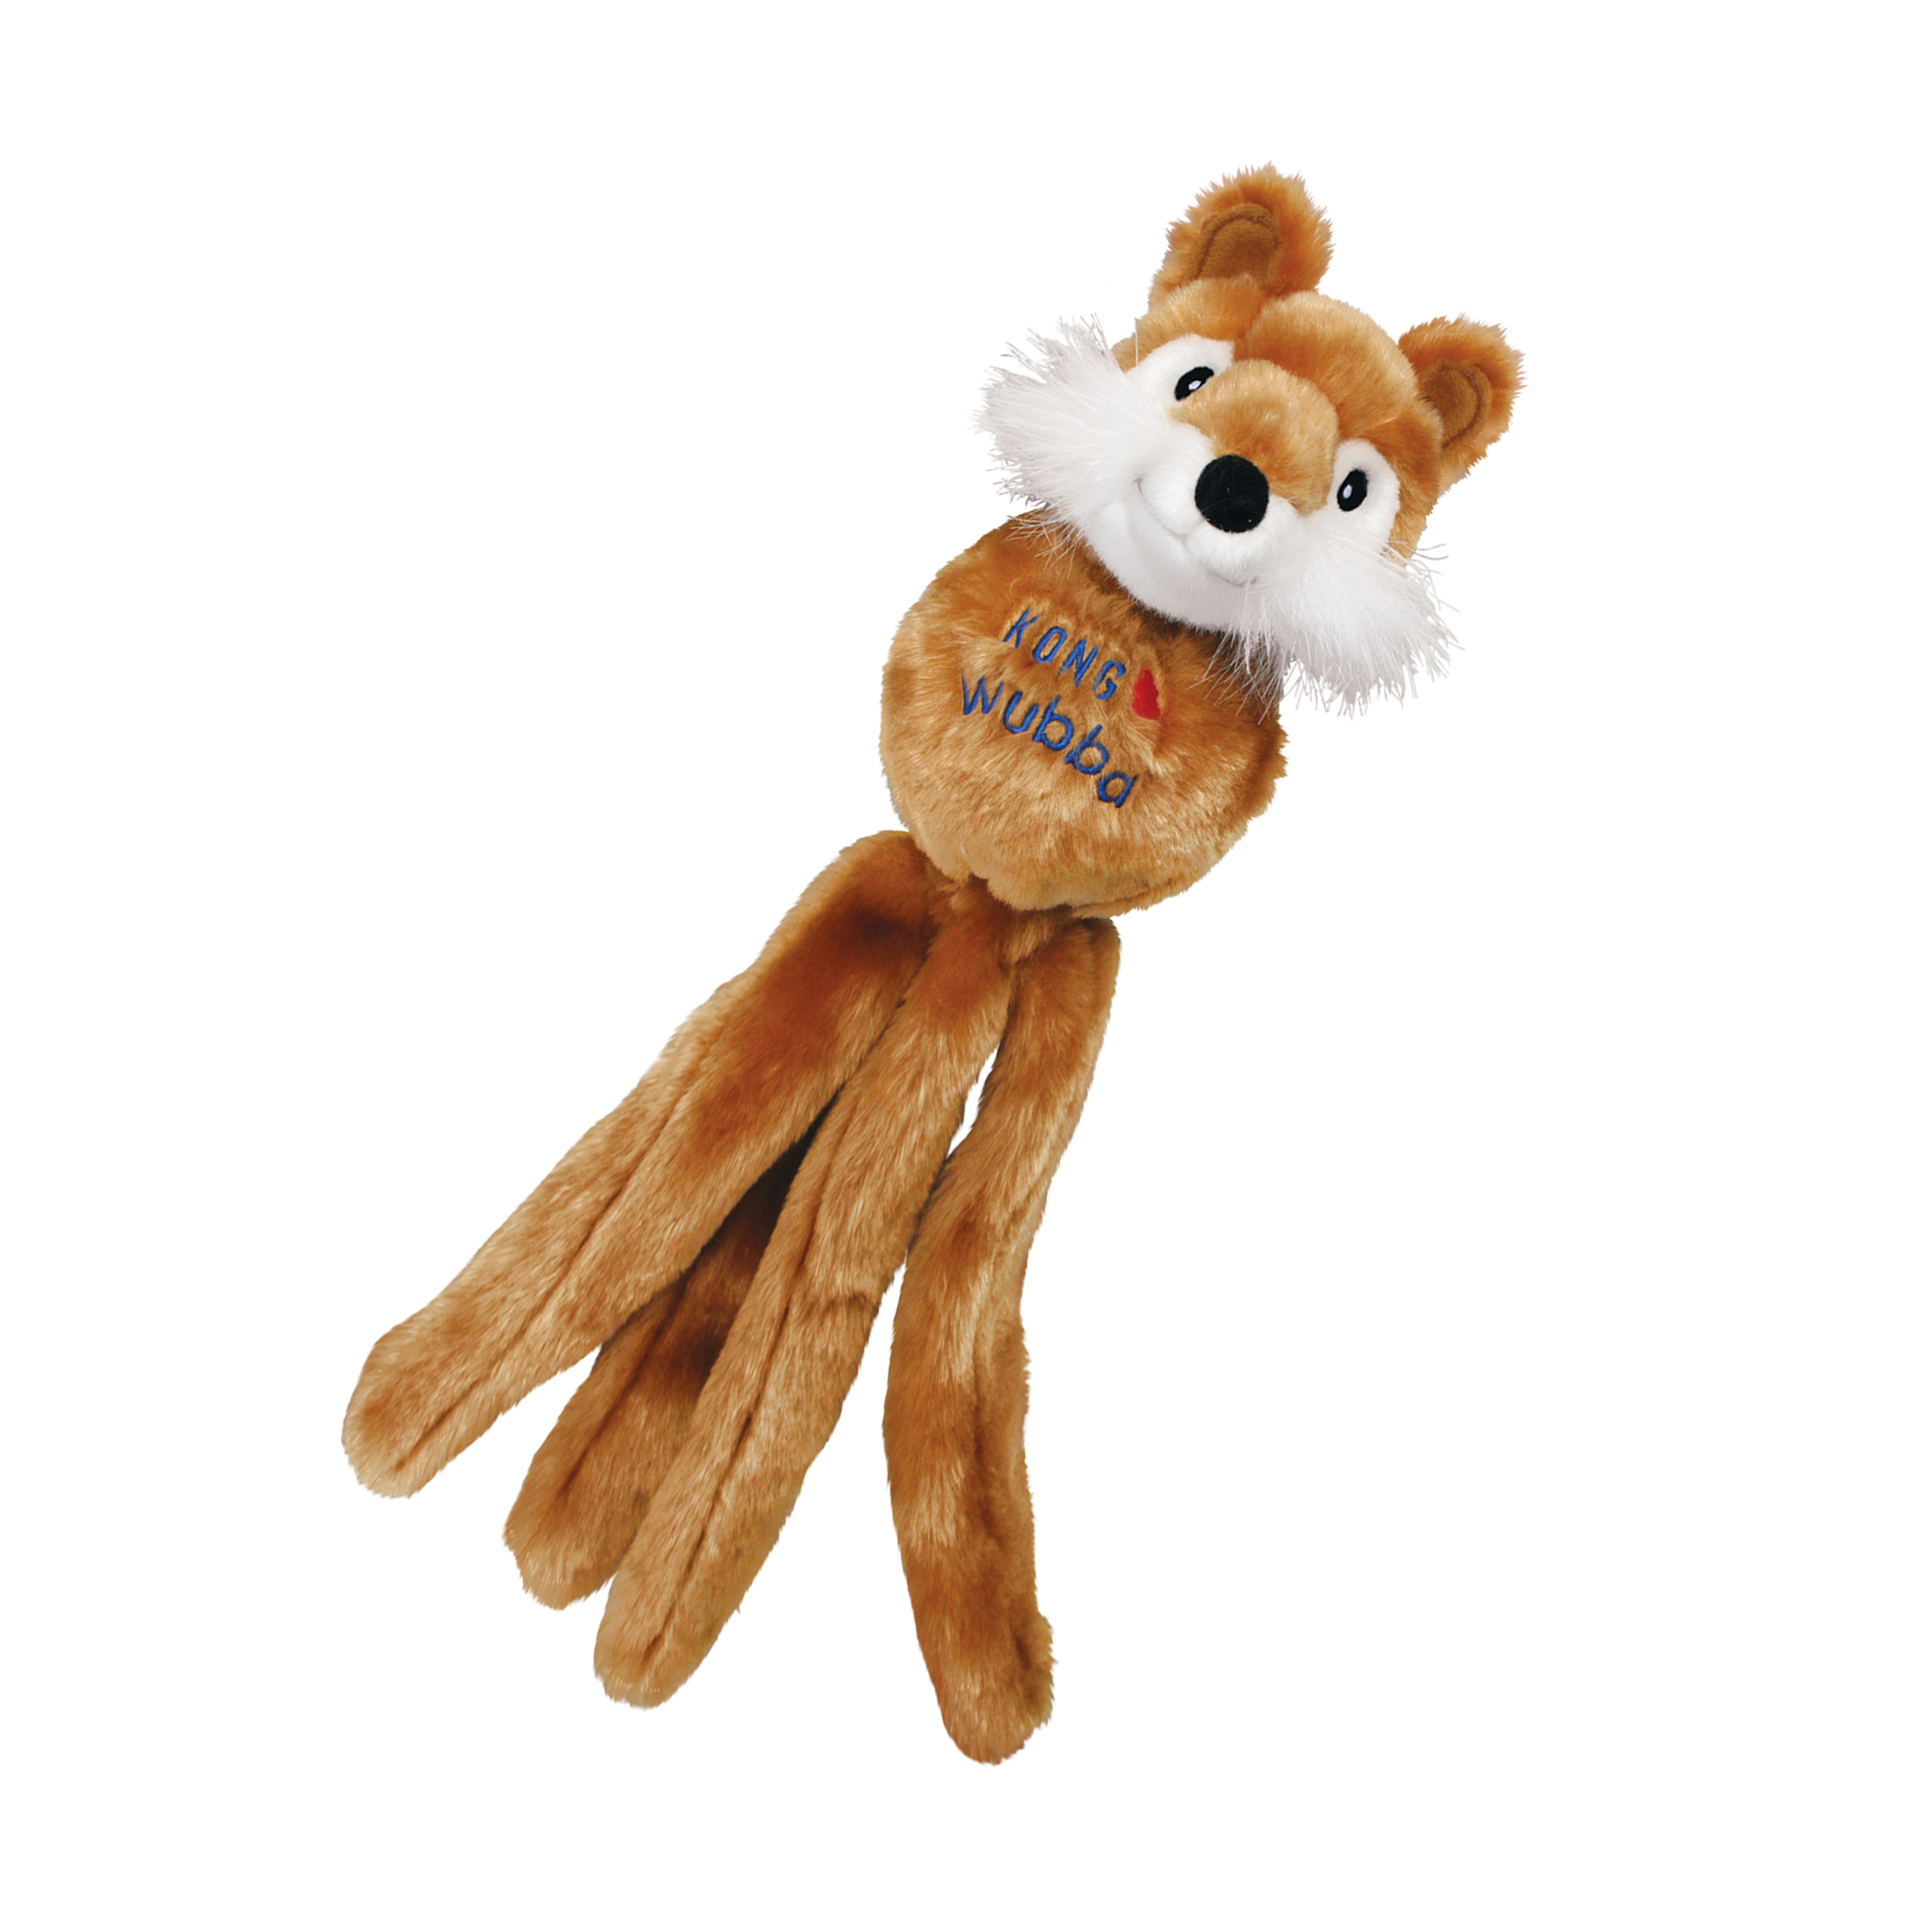 Wubba Friends offpack product image